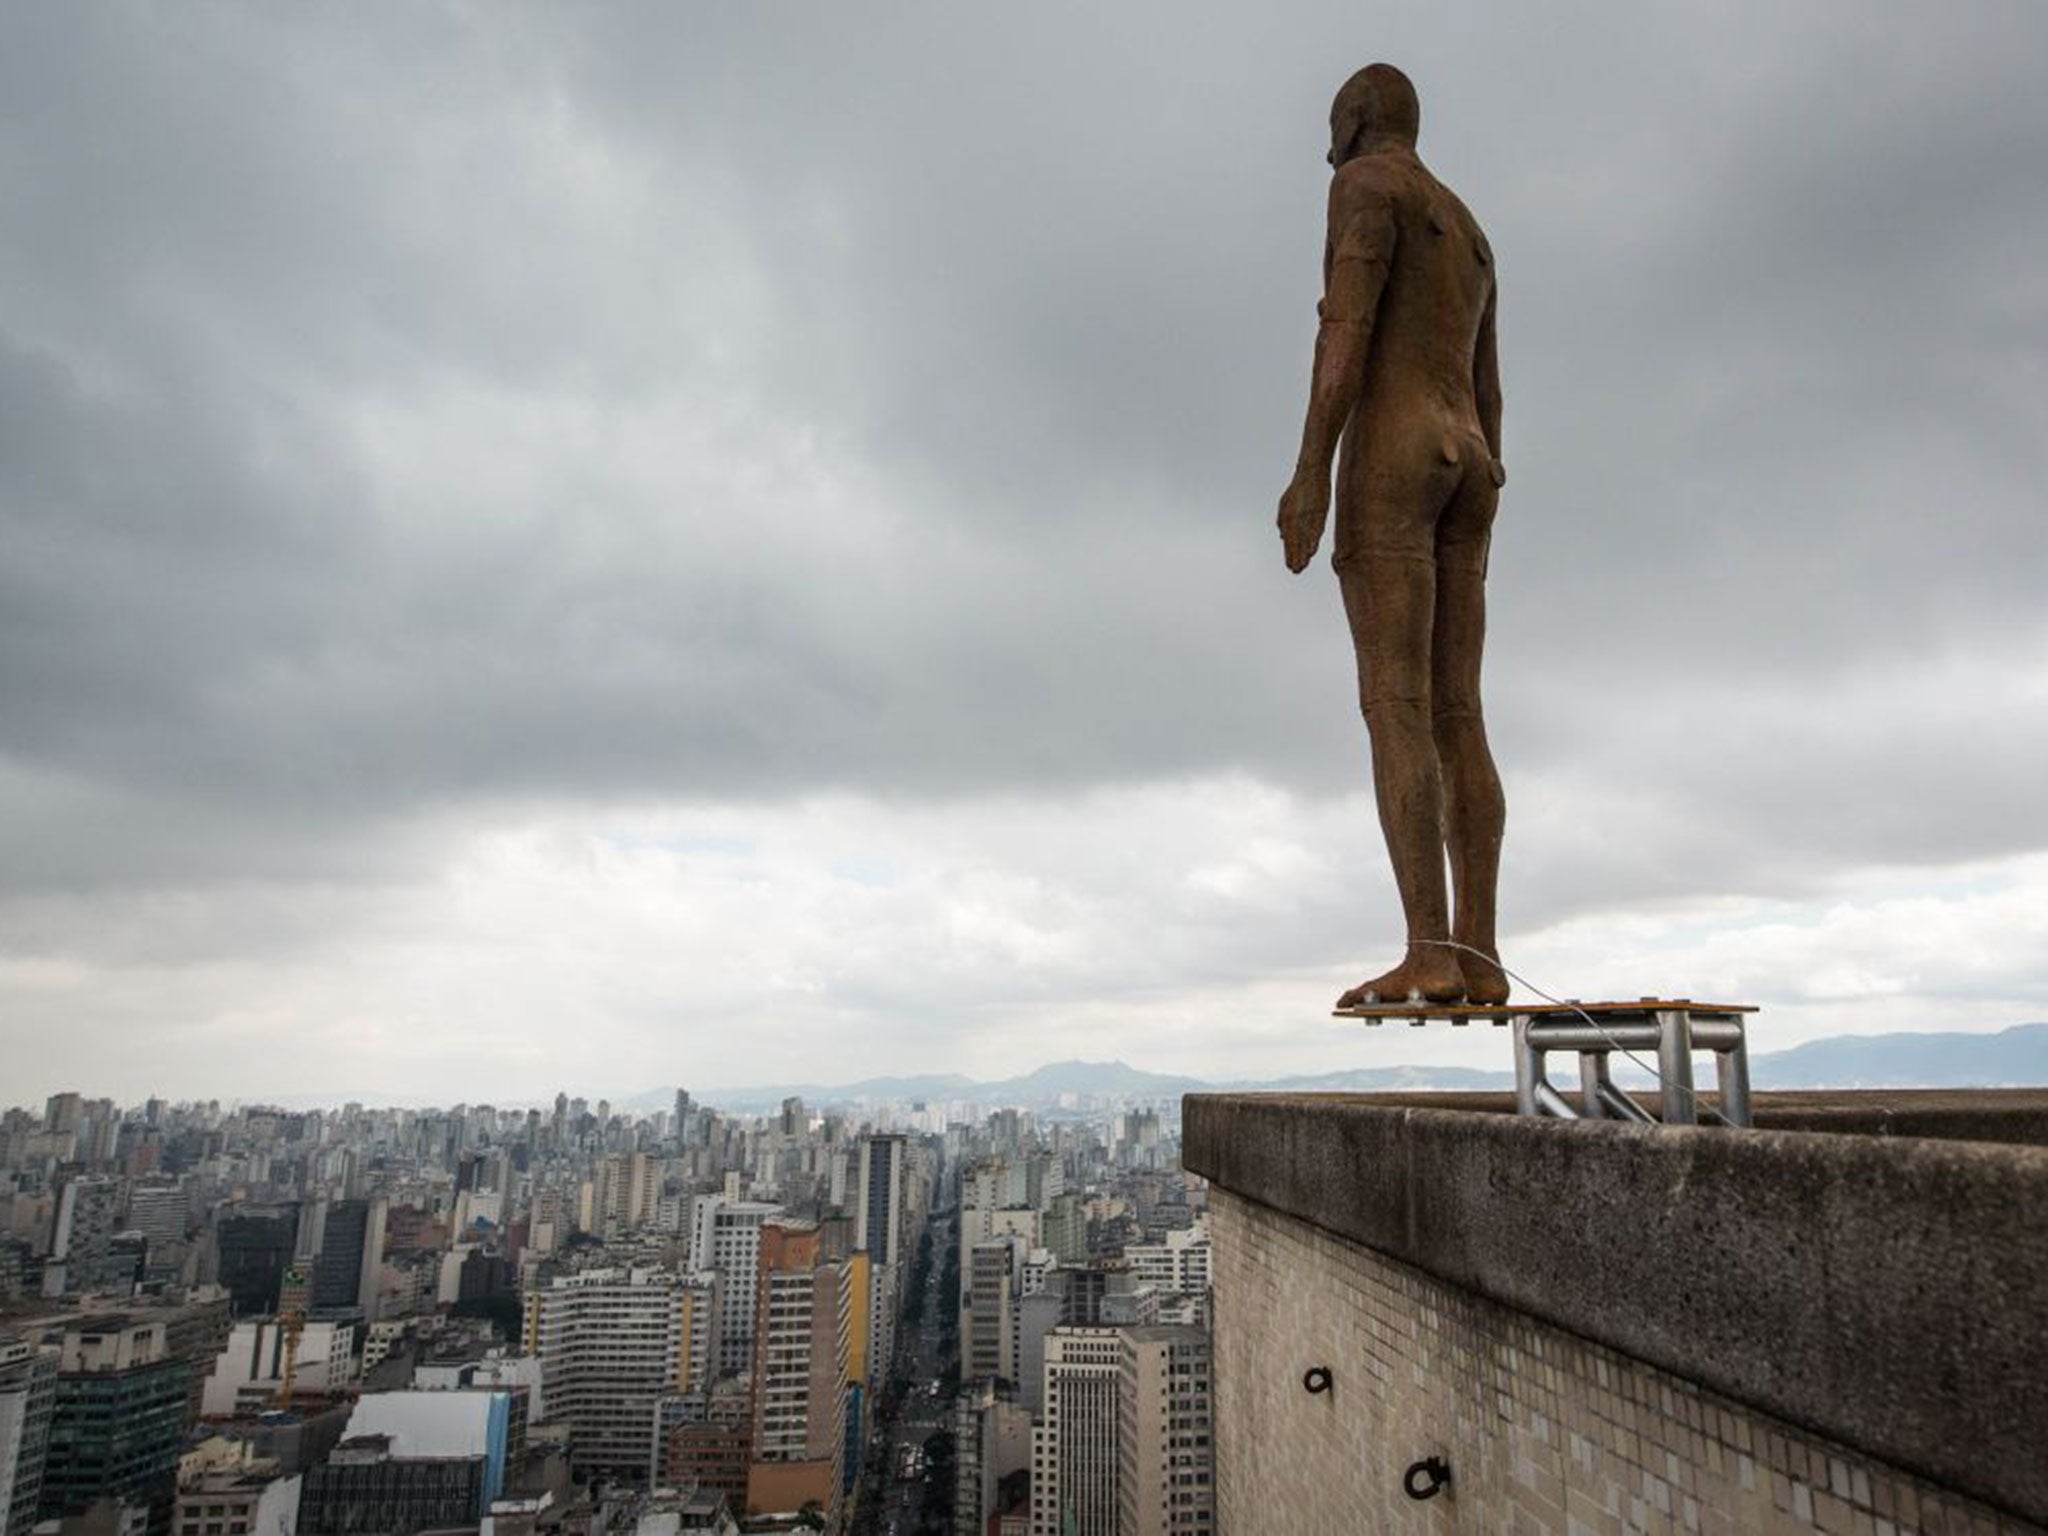 A sculpture by Antony Gormley in Sao Paulo, Brazil; the exhibition has been cancelled in Hong Kong after a banker’s suicide